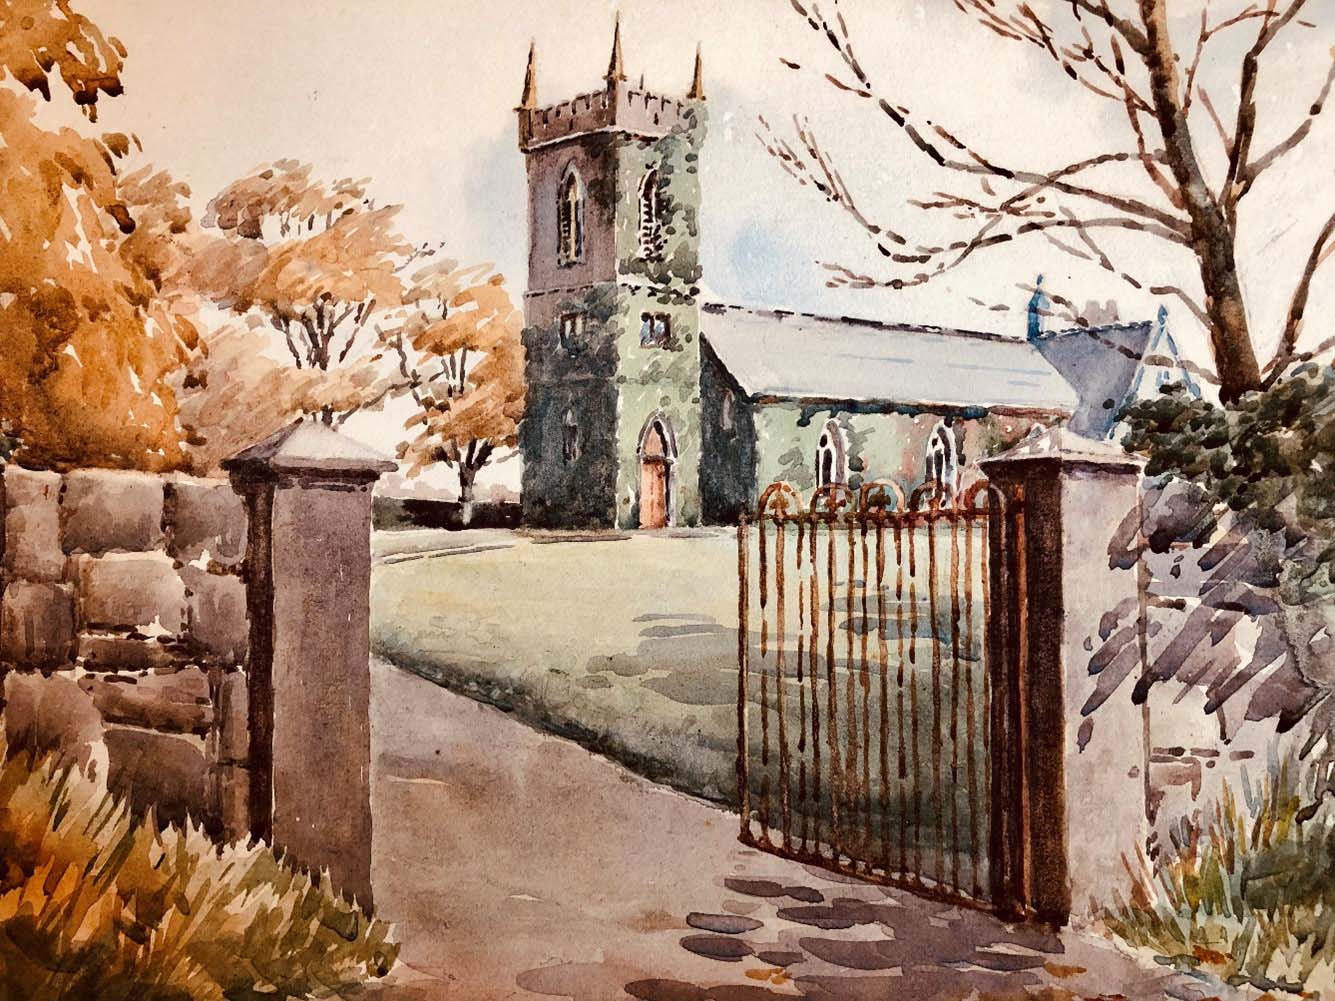 A watercolour painting of St Catherine's Church, Ahascragh, was gifted to the Revd Henry de Vere Hunt on his retirement in 1918, and recently returned to the parish.  This forms part of a watercolour series which also pictures Ahascragh village and Castlegar House.